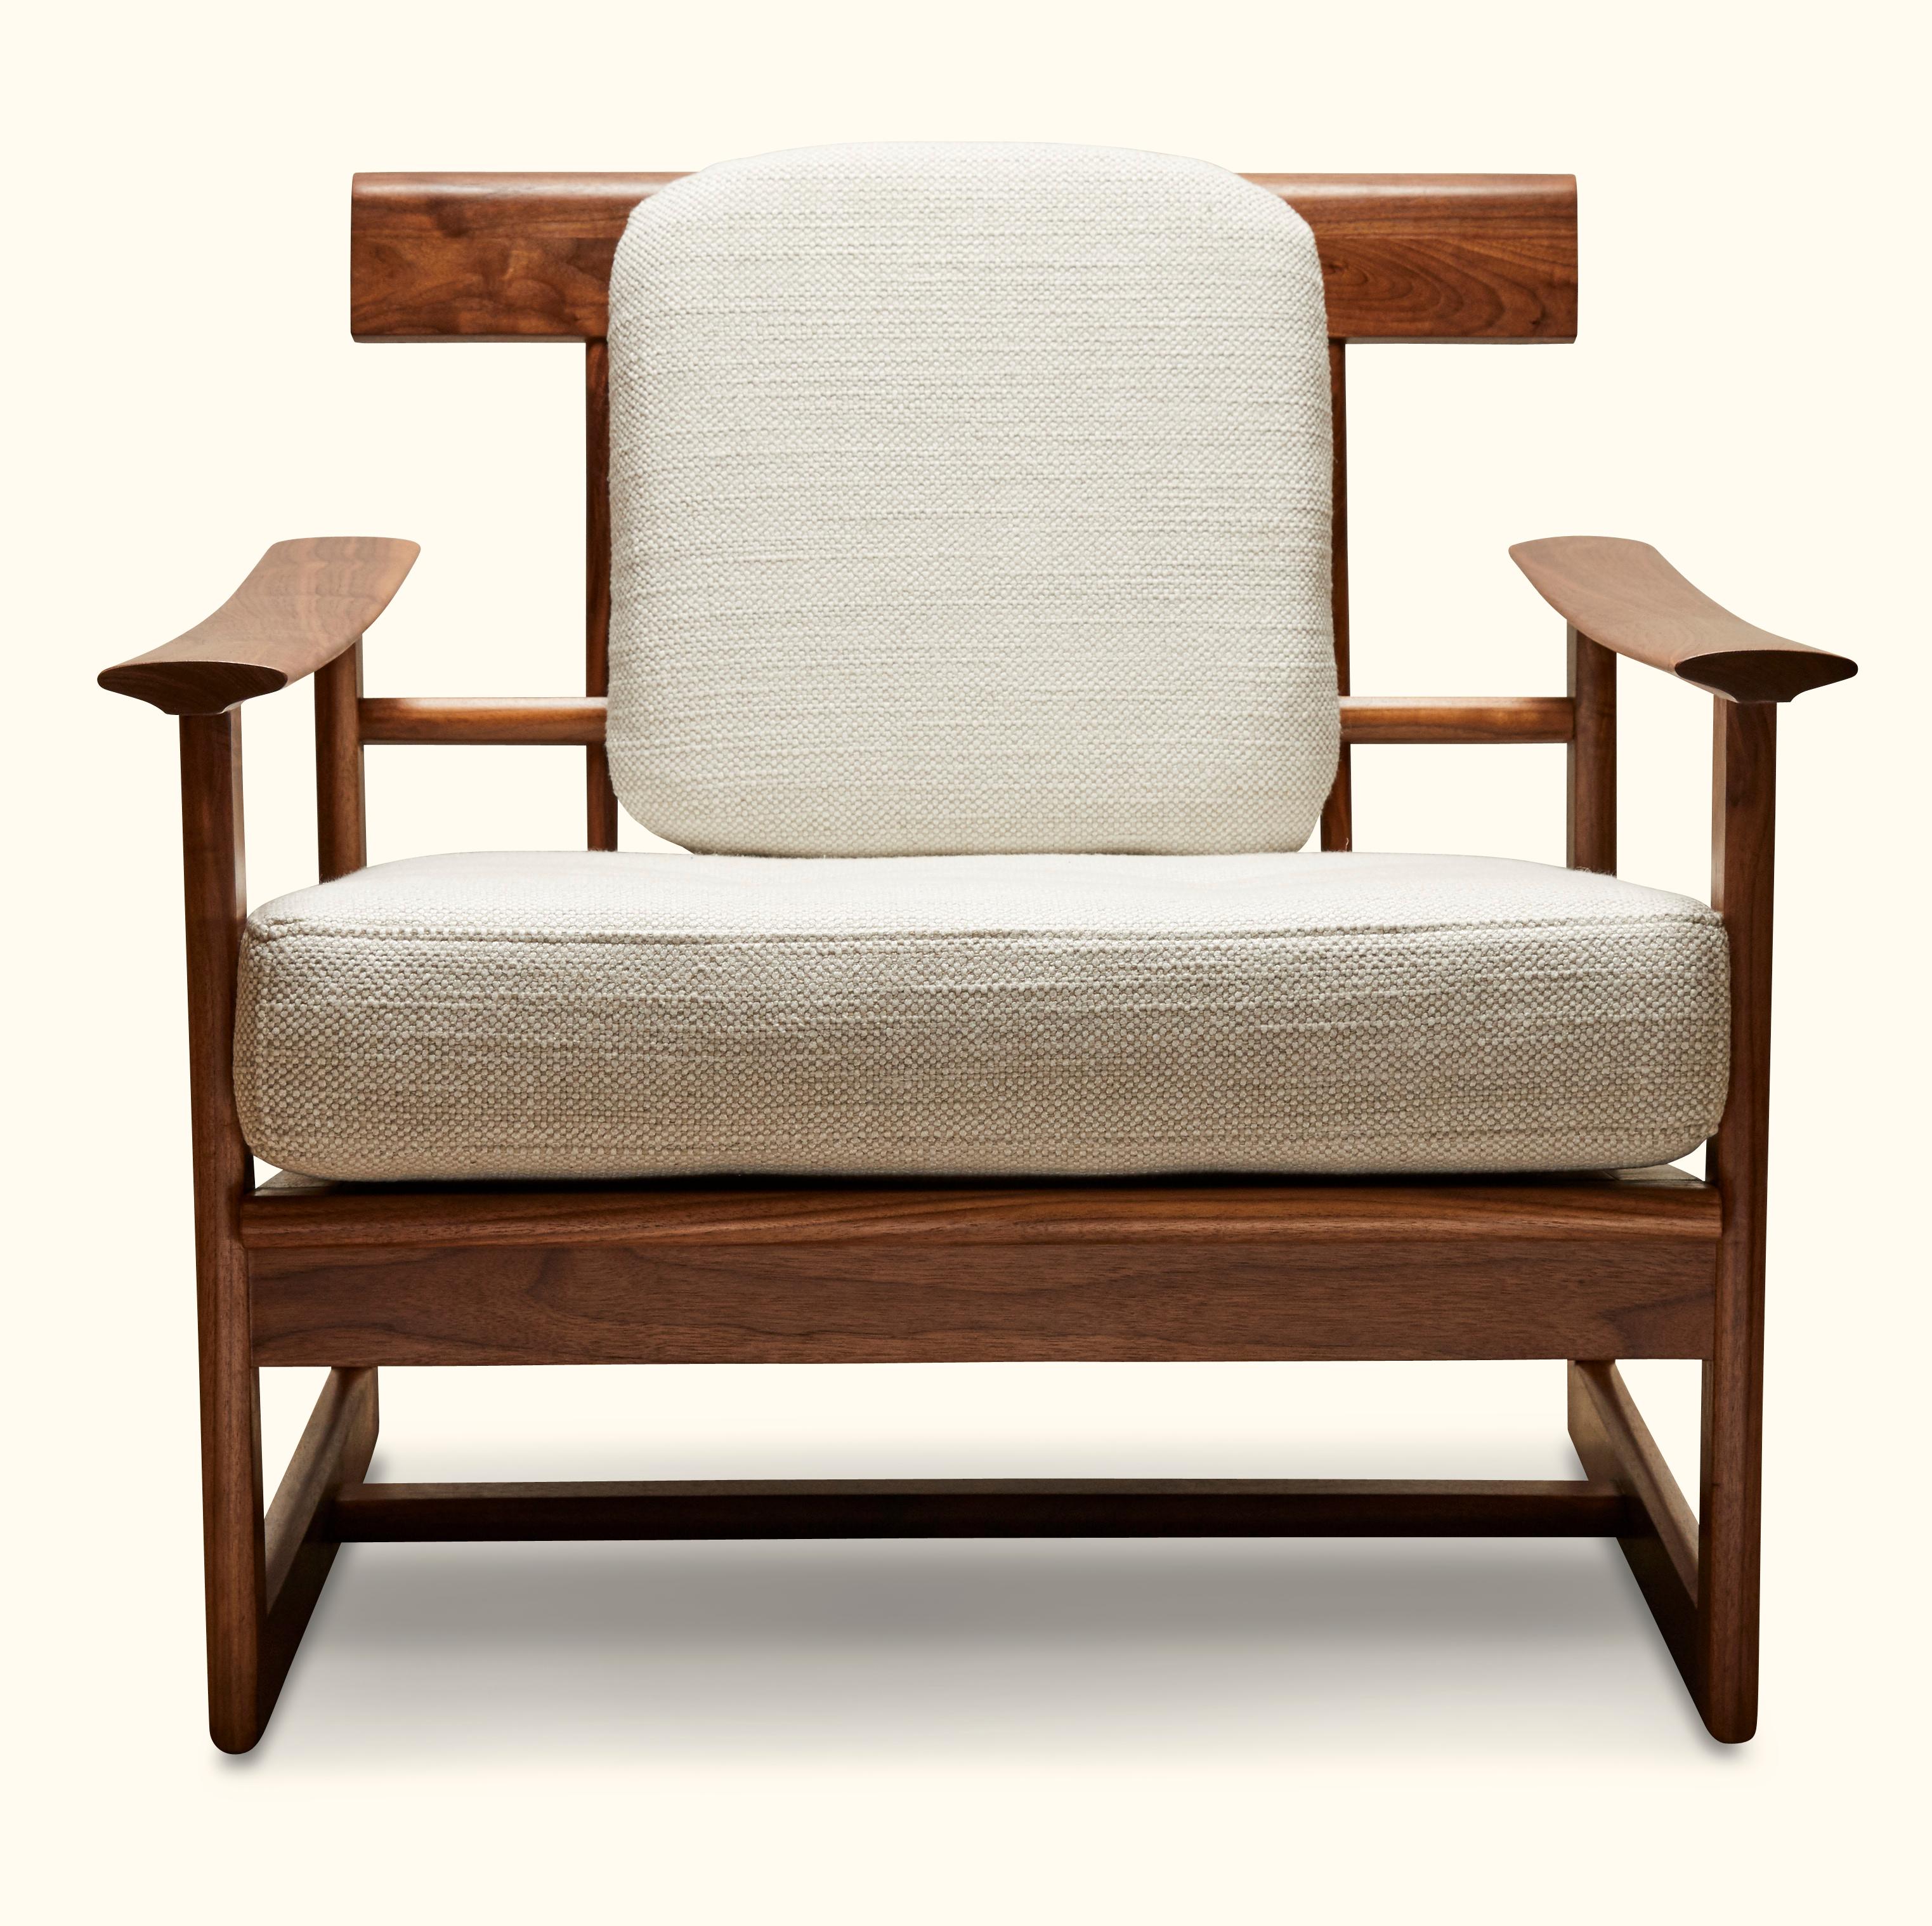 The inverness chair is a Japanese-inspired spindle chair made of solid oak or walnut. Shown here in stock in natural walnut. Available finishes may vary. 

The Lawson-Fenning Collection is designed and handmade in Los Angeles, California.

Can be